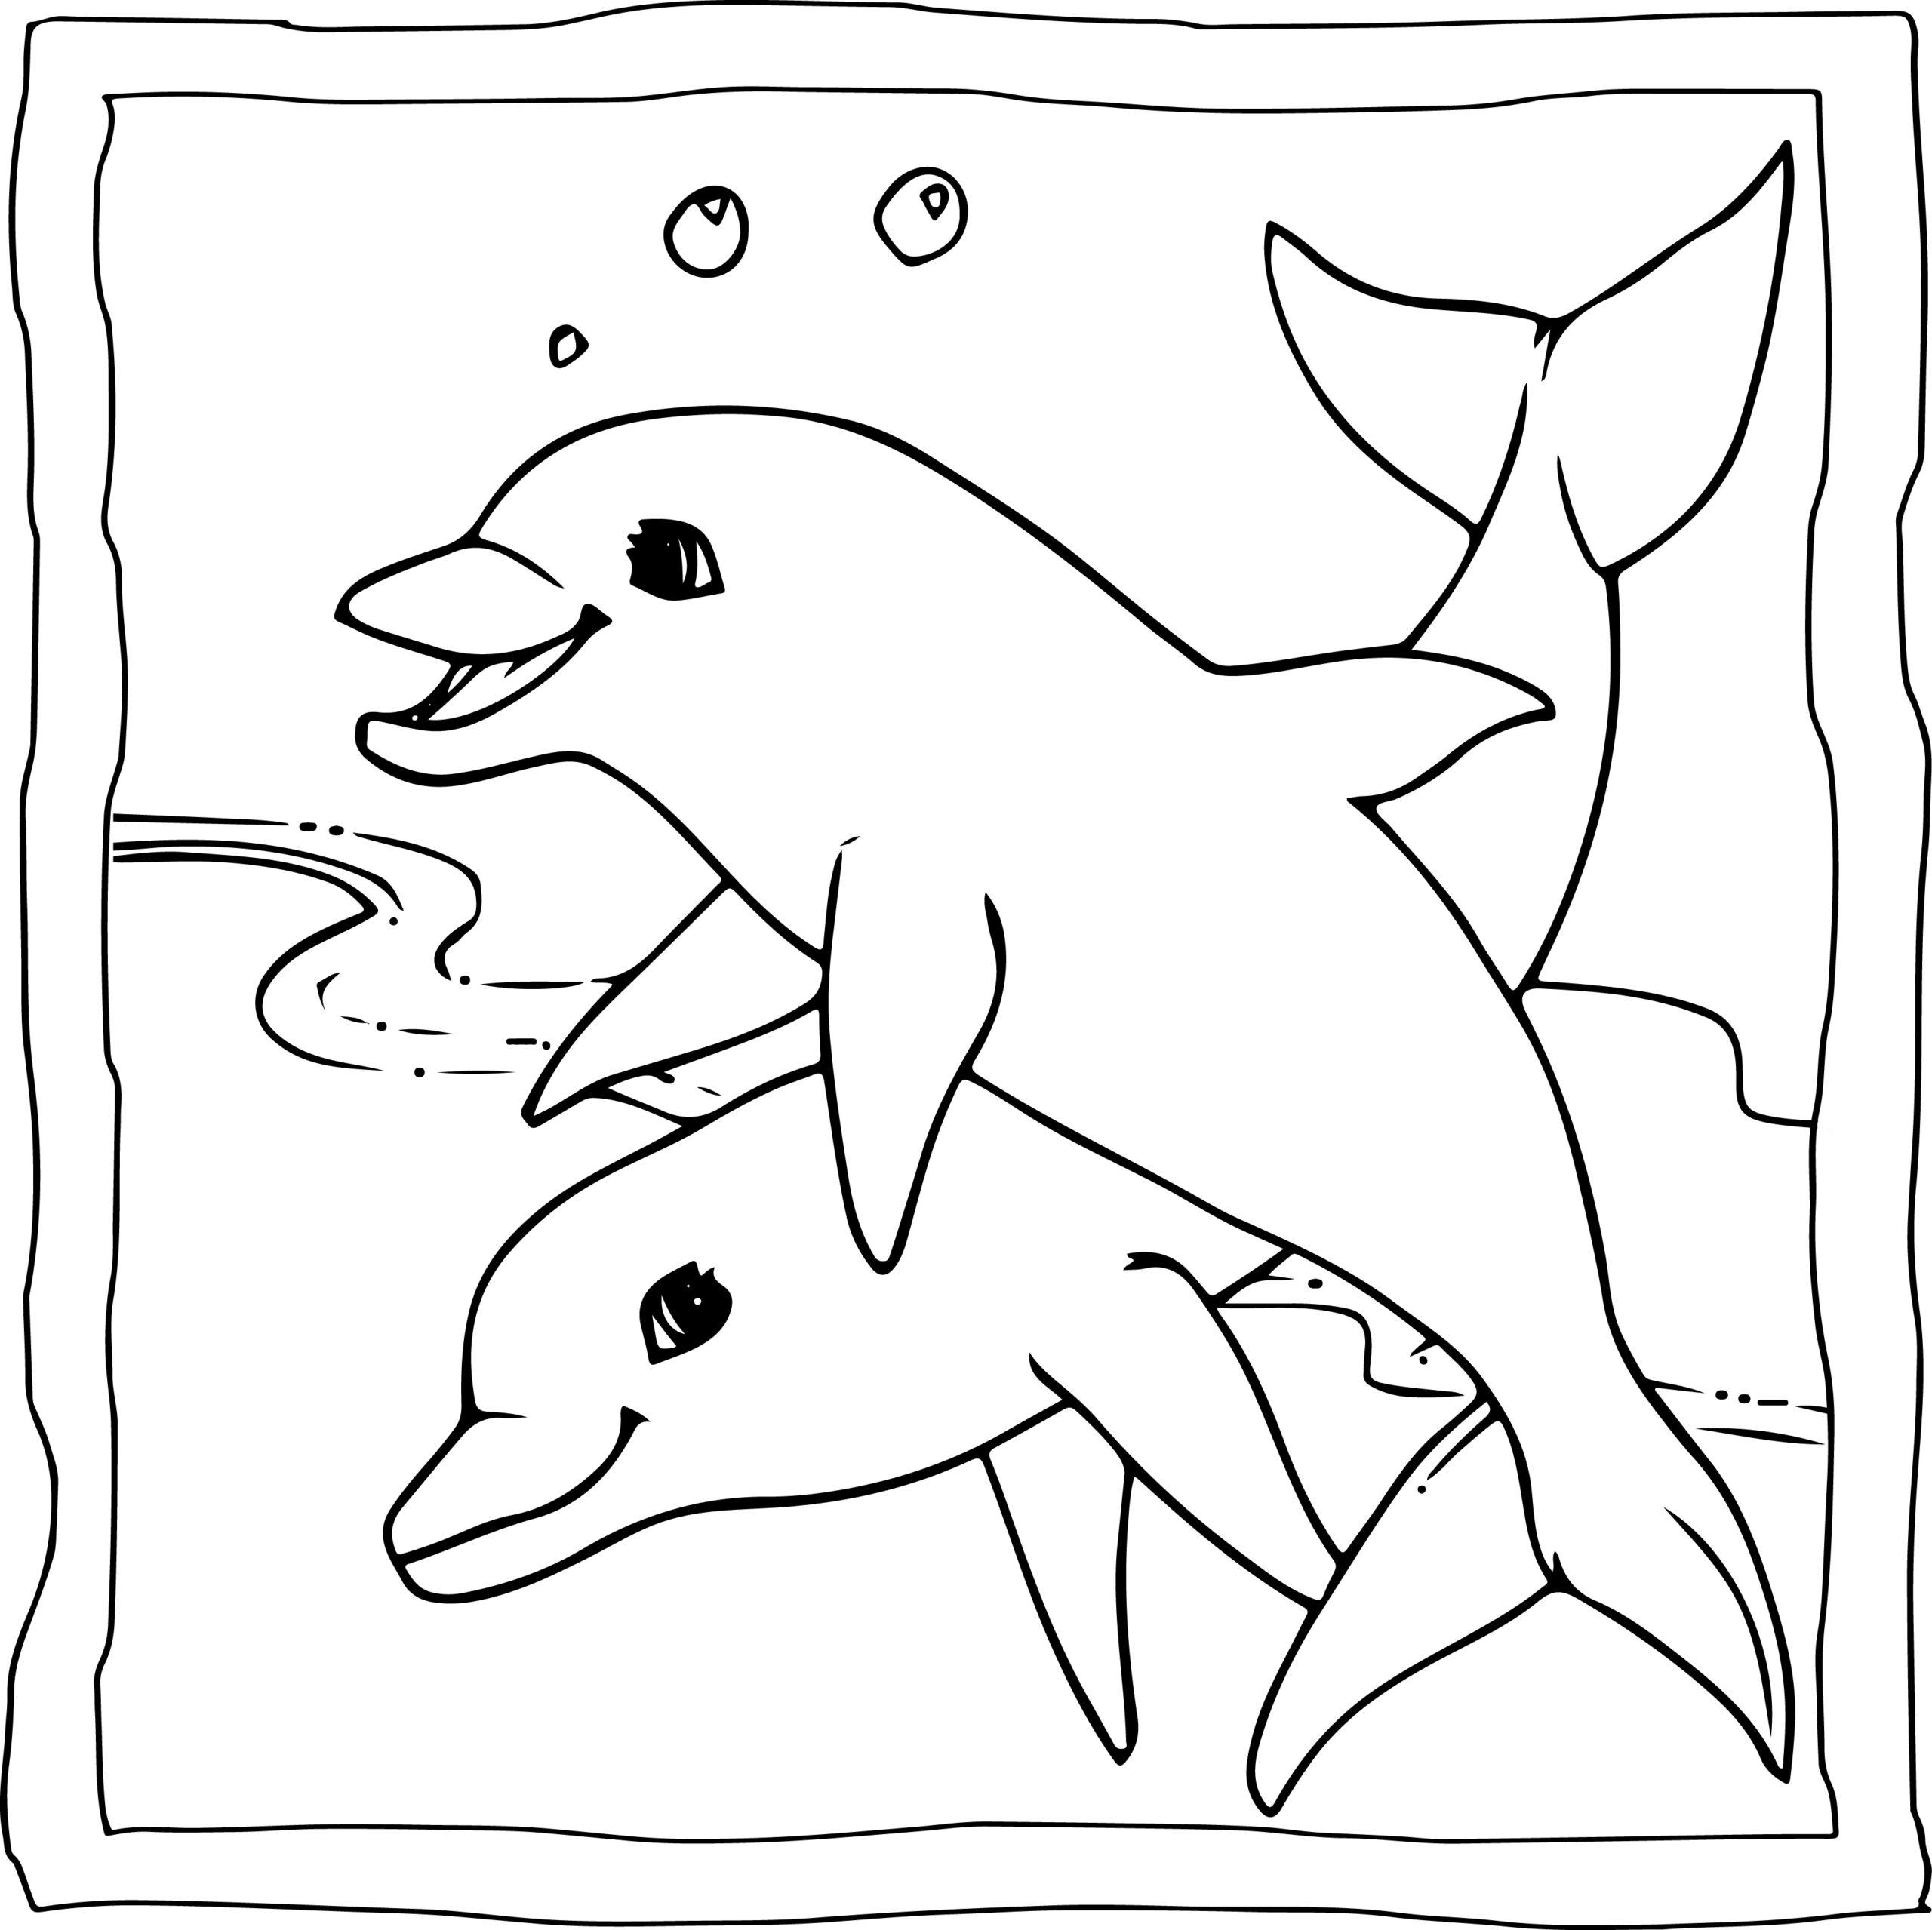 Dolphin coloring book easy and fun dolphins coloring pages for kids made by teachers